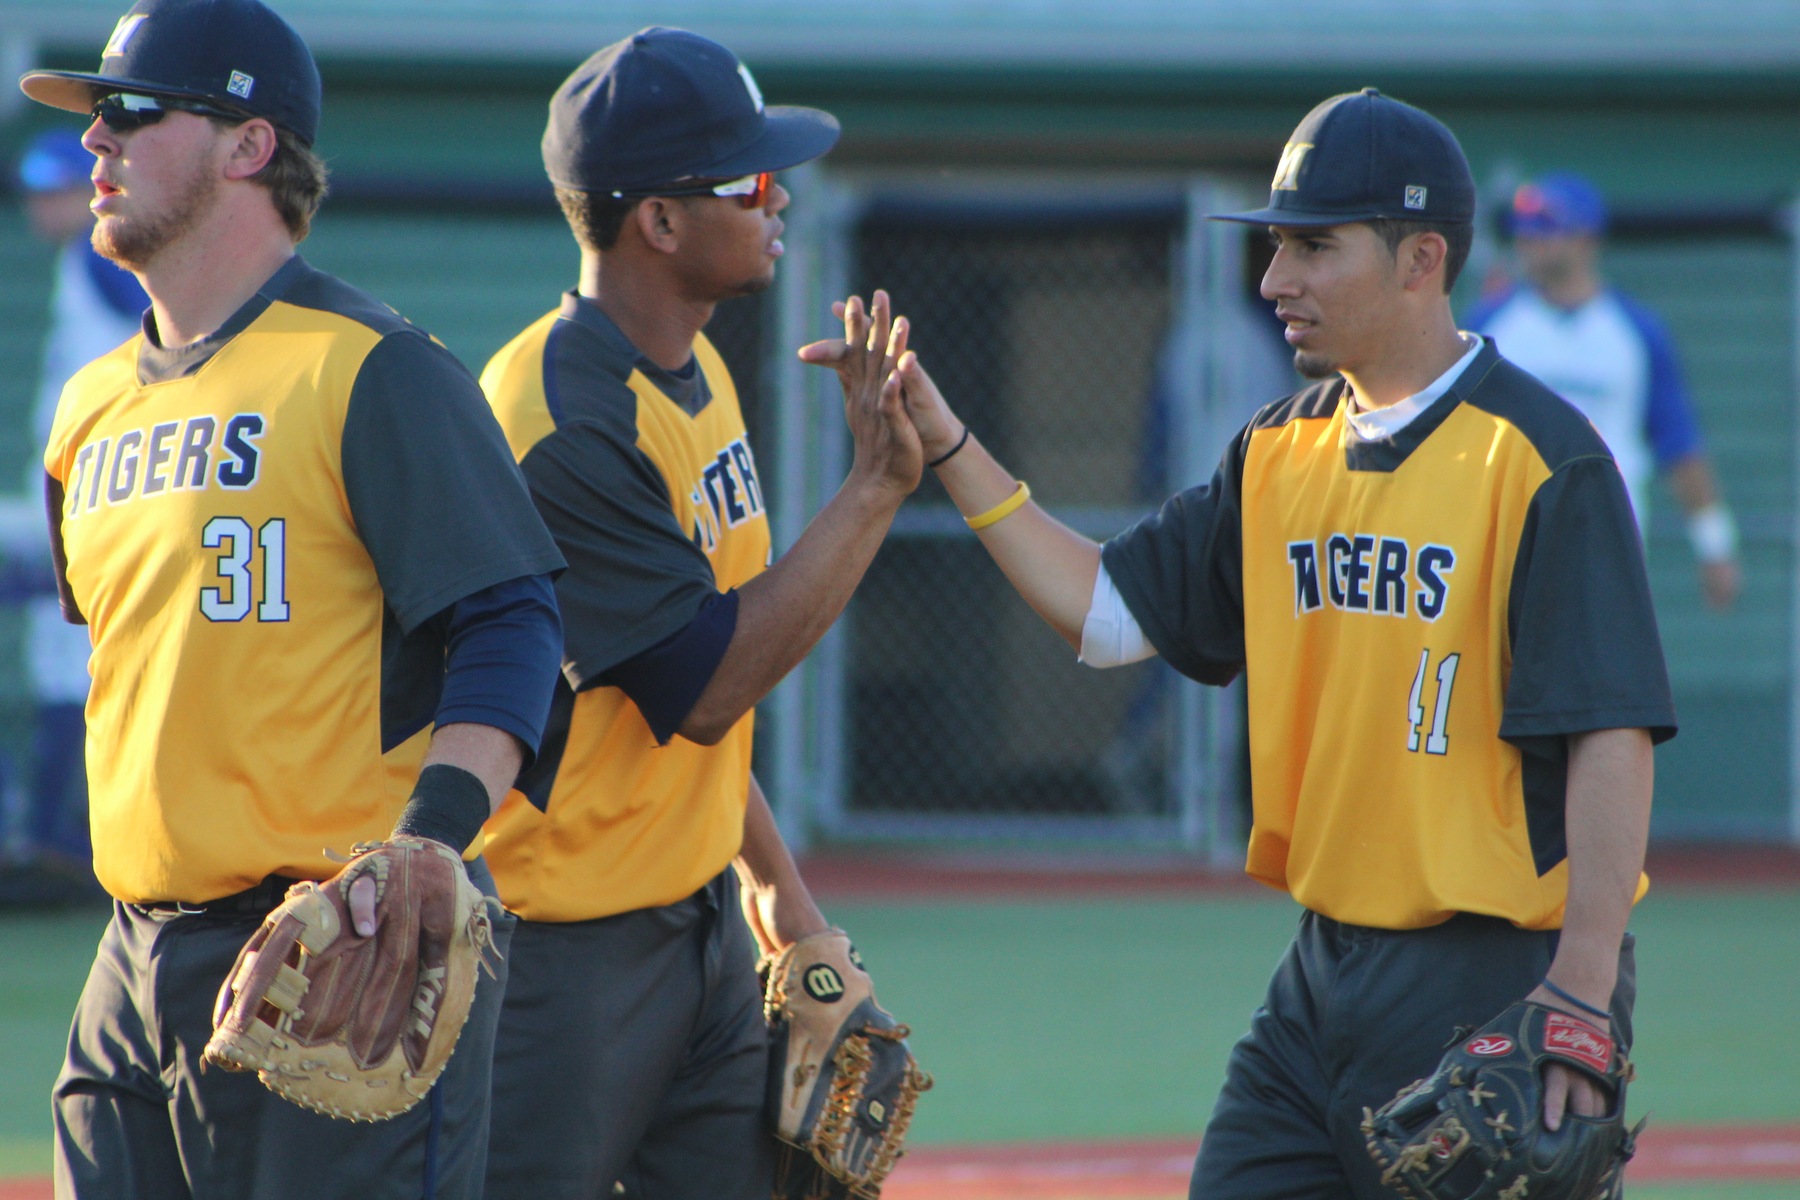 Diogen Ceballos and Snayder Ruiz combined to drive in five runs in the game two win for the Tigers